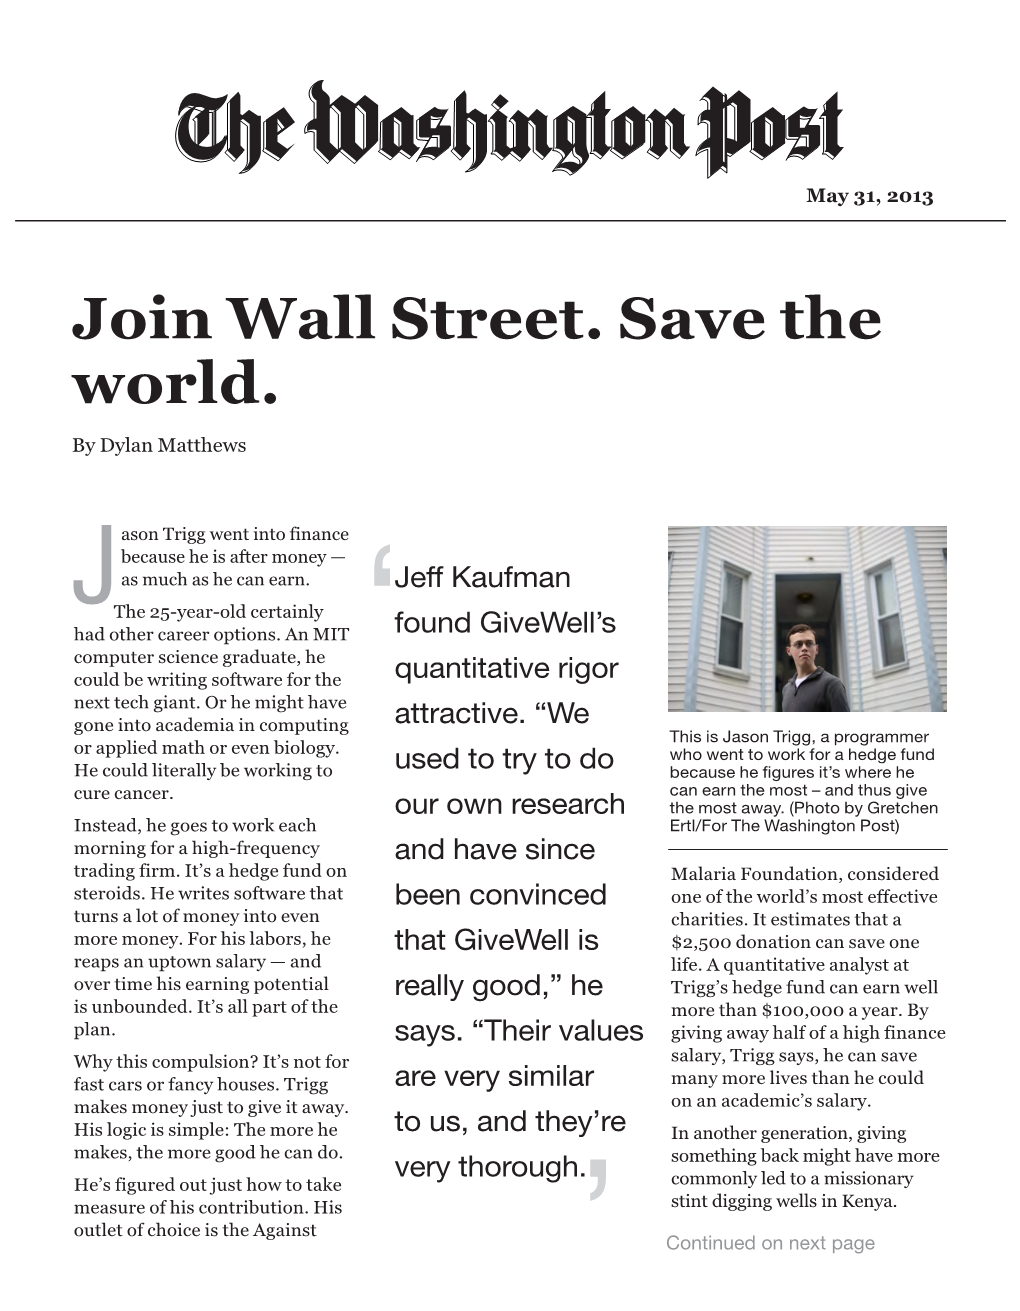 Join Wall Street. Save the World